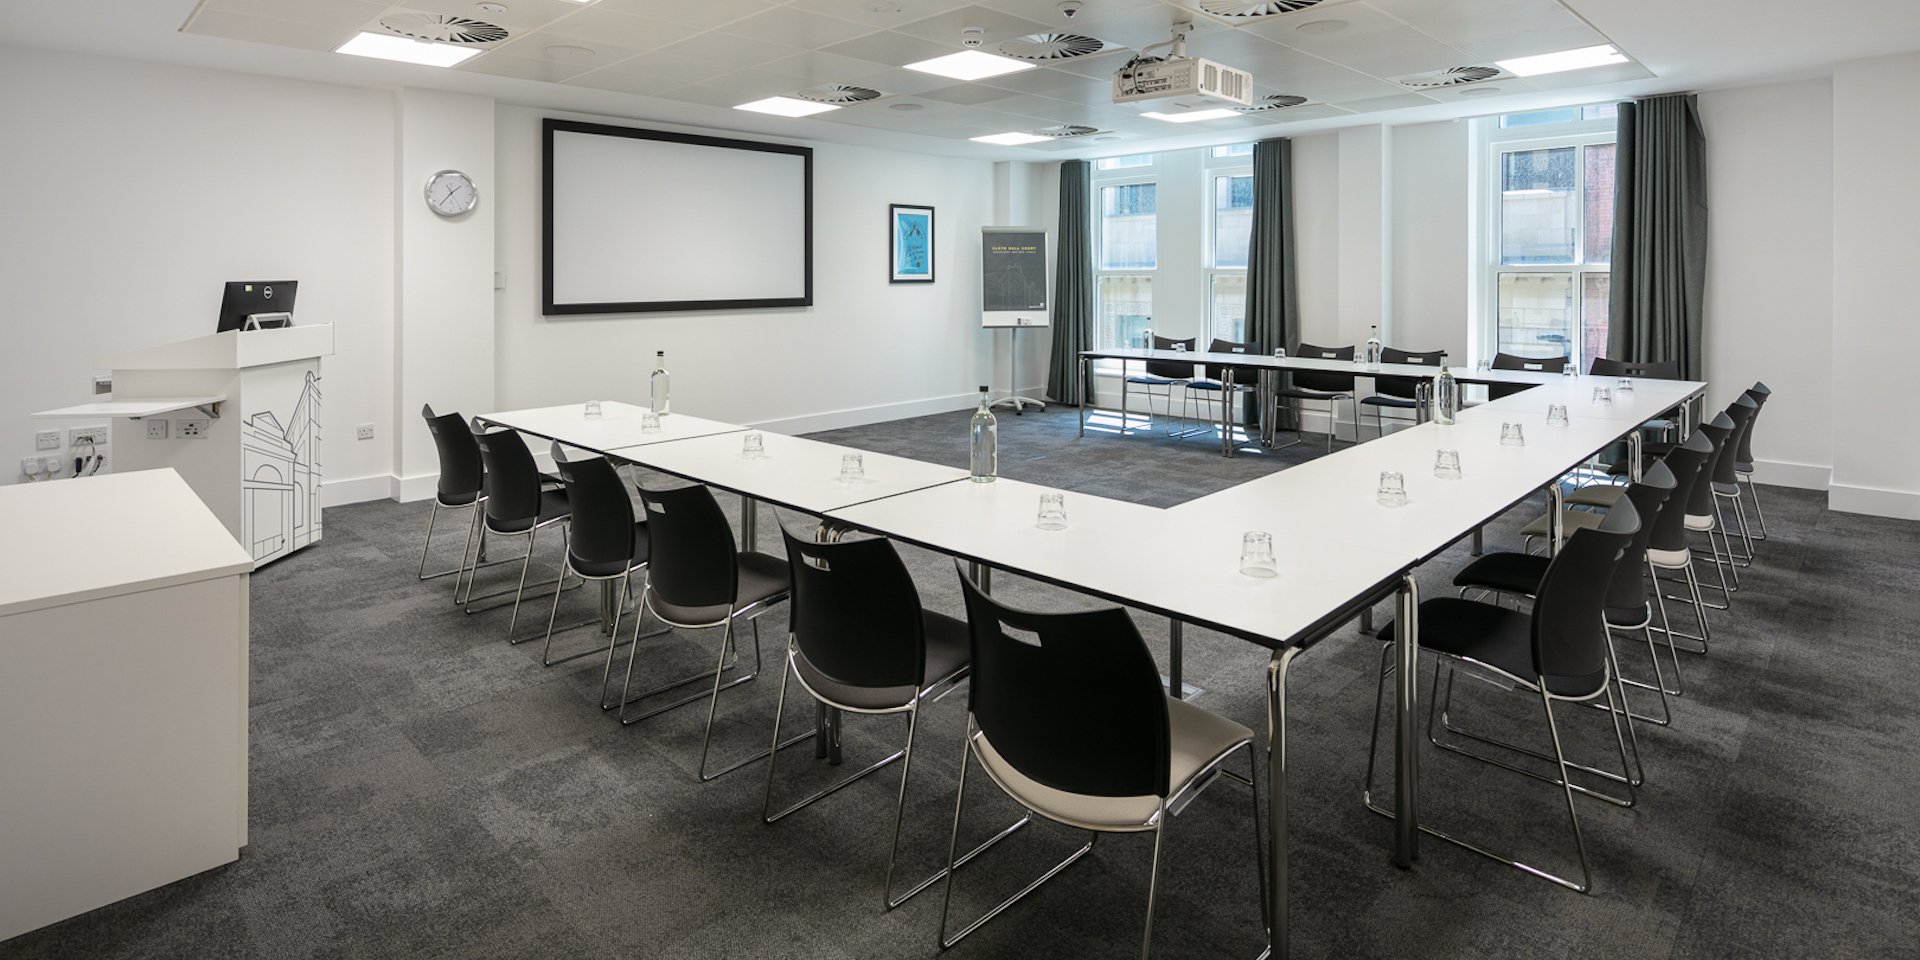 a conference room at cloth hall court